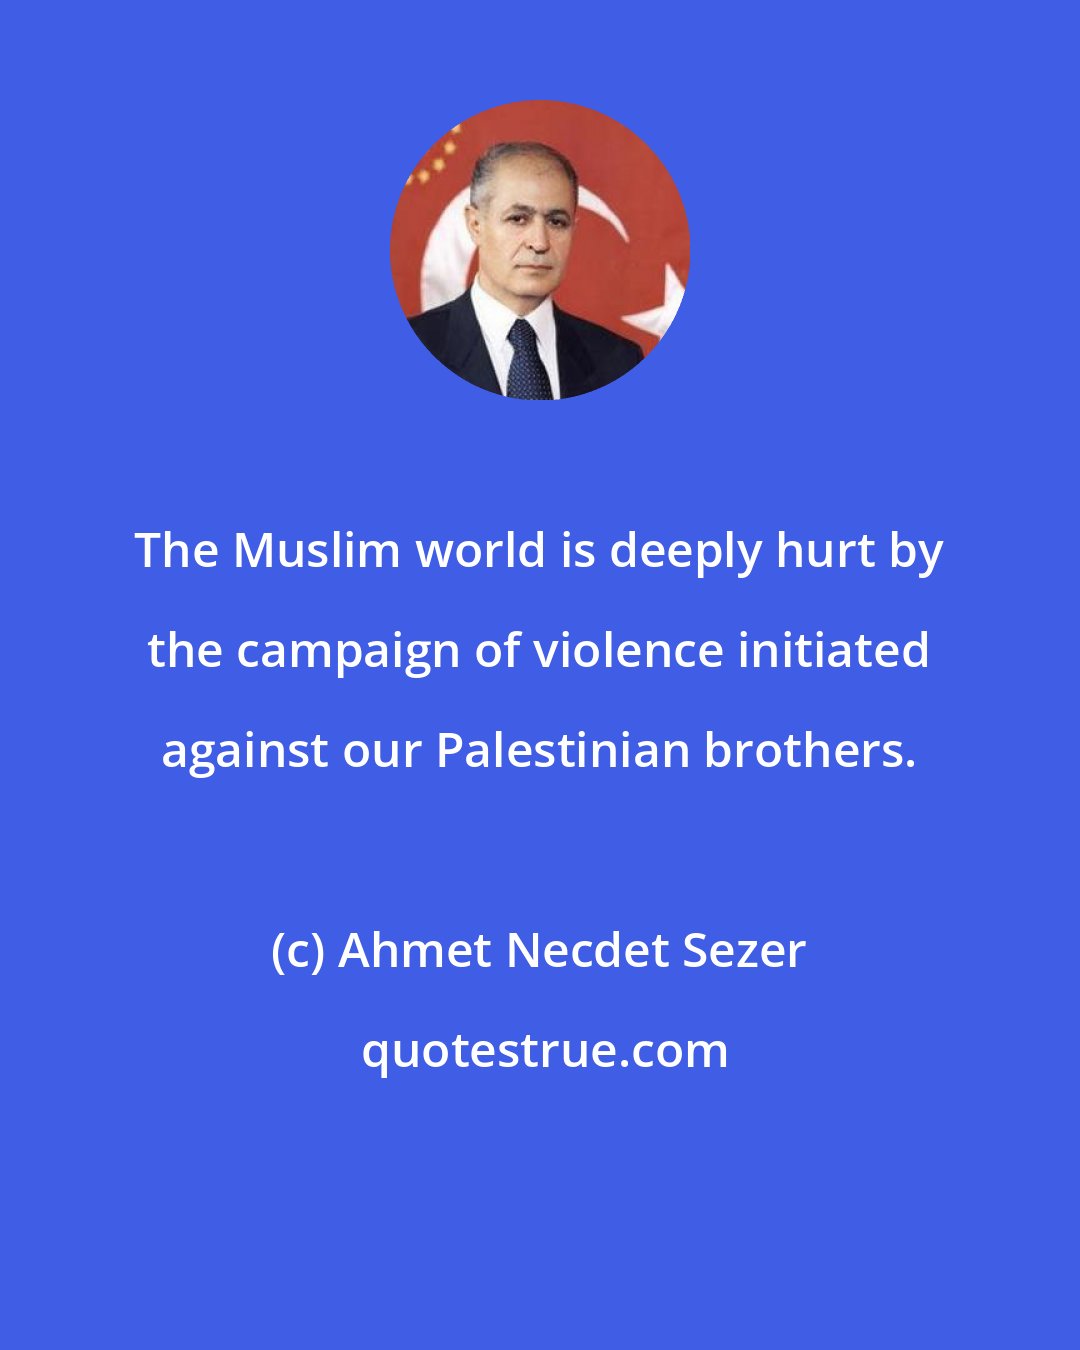 Ahmet Necdet Sezer: The Muslim world is deeply hurt by the campaign of violence initiated against our Palestinian brothers.